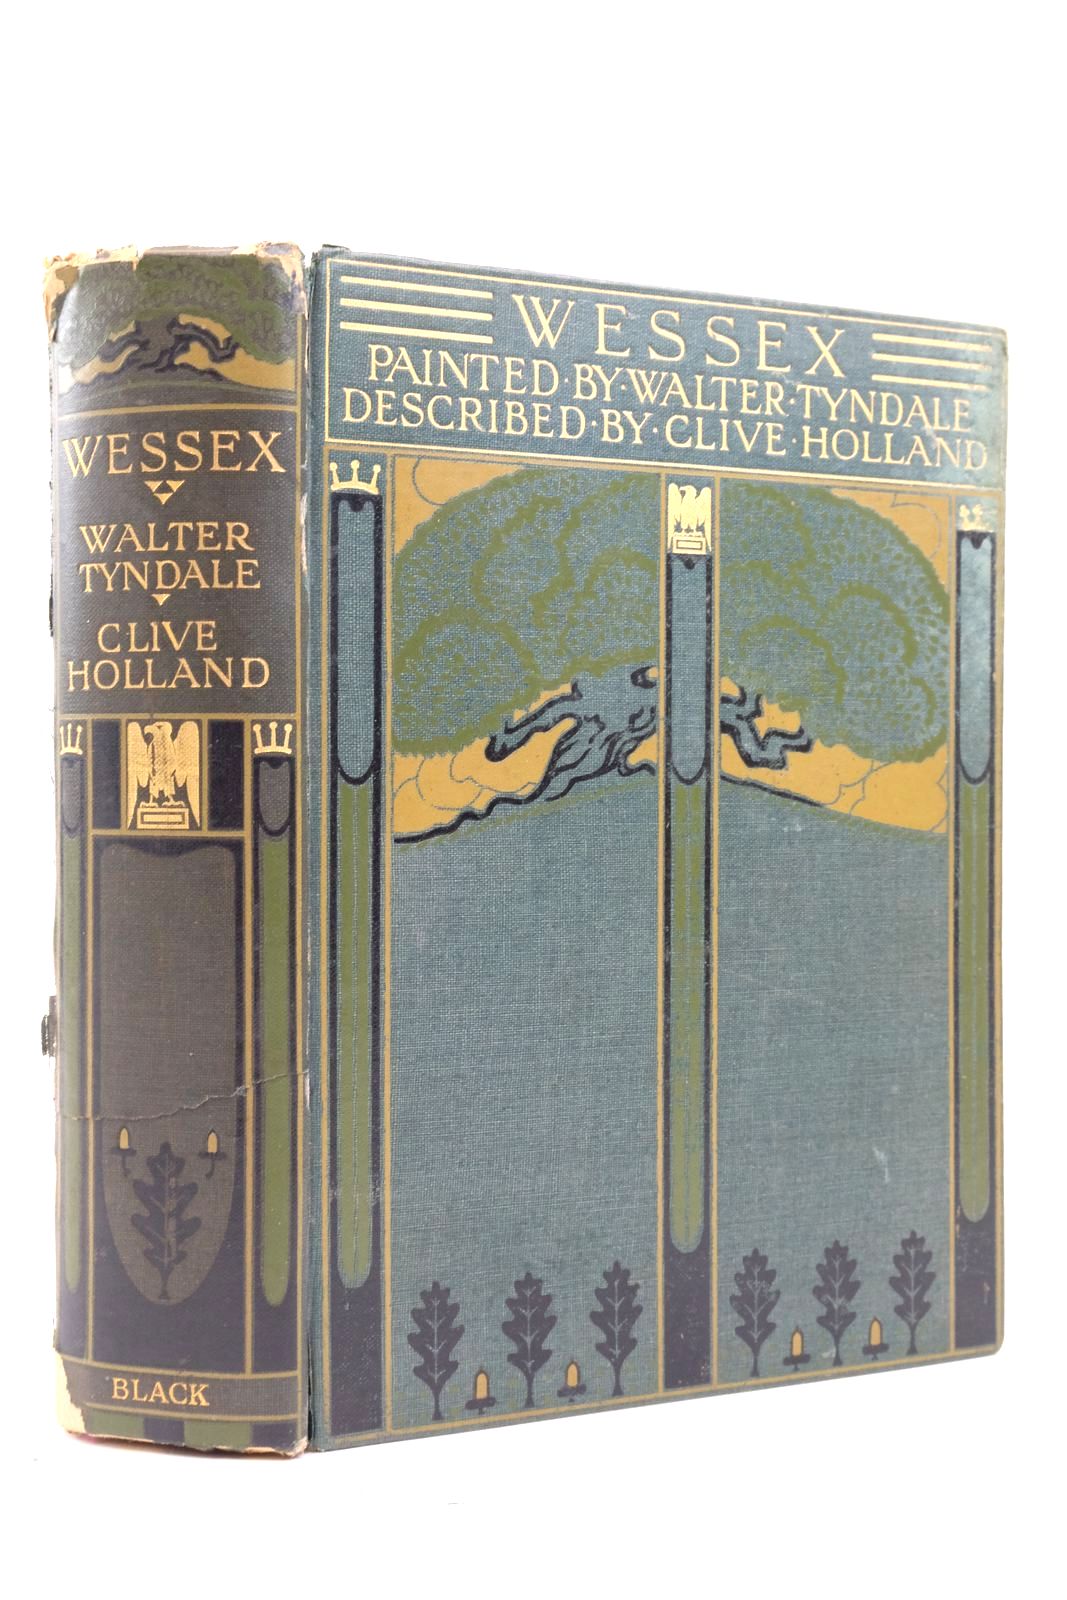 Photo of WESSEX written by Holland, Clive illustrated by Tyndale, Walter published by Adam & Charles Black (STOCK CODE: 2137553)  for sale by Stella & Rose's Books